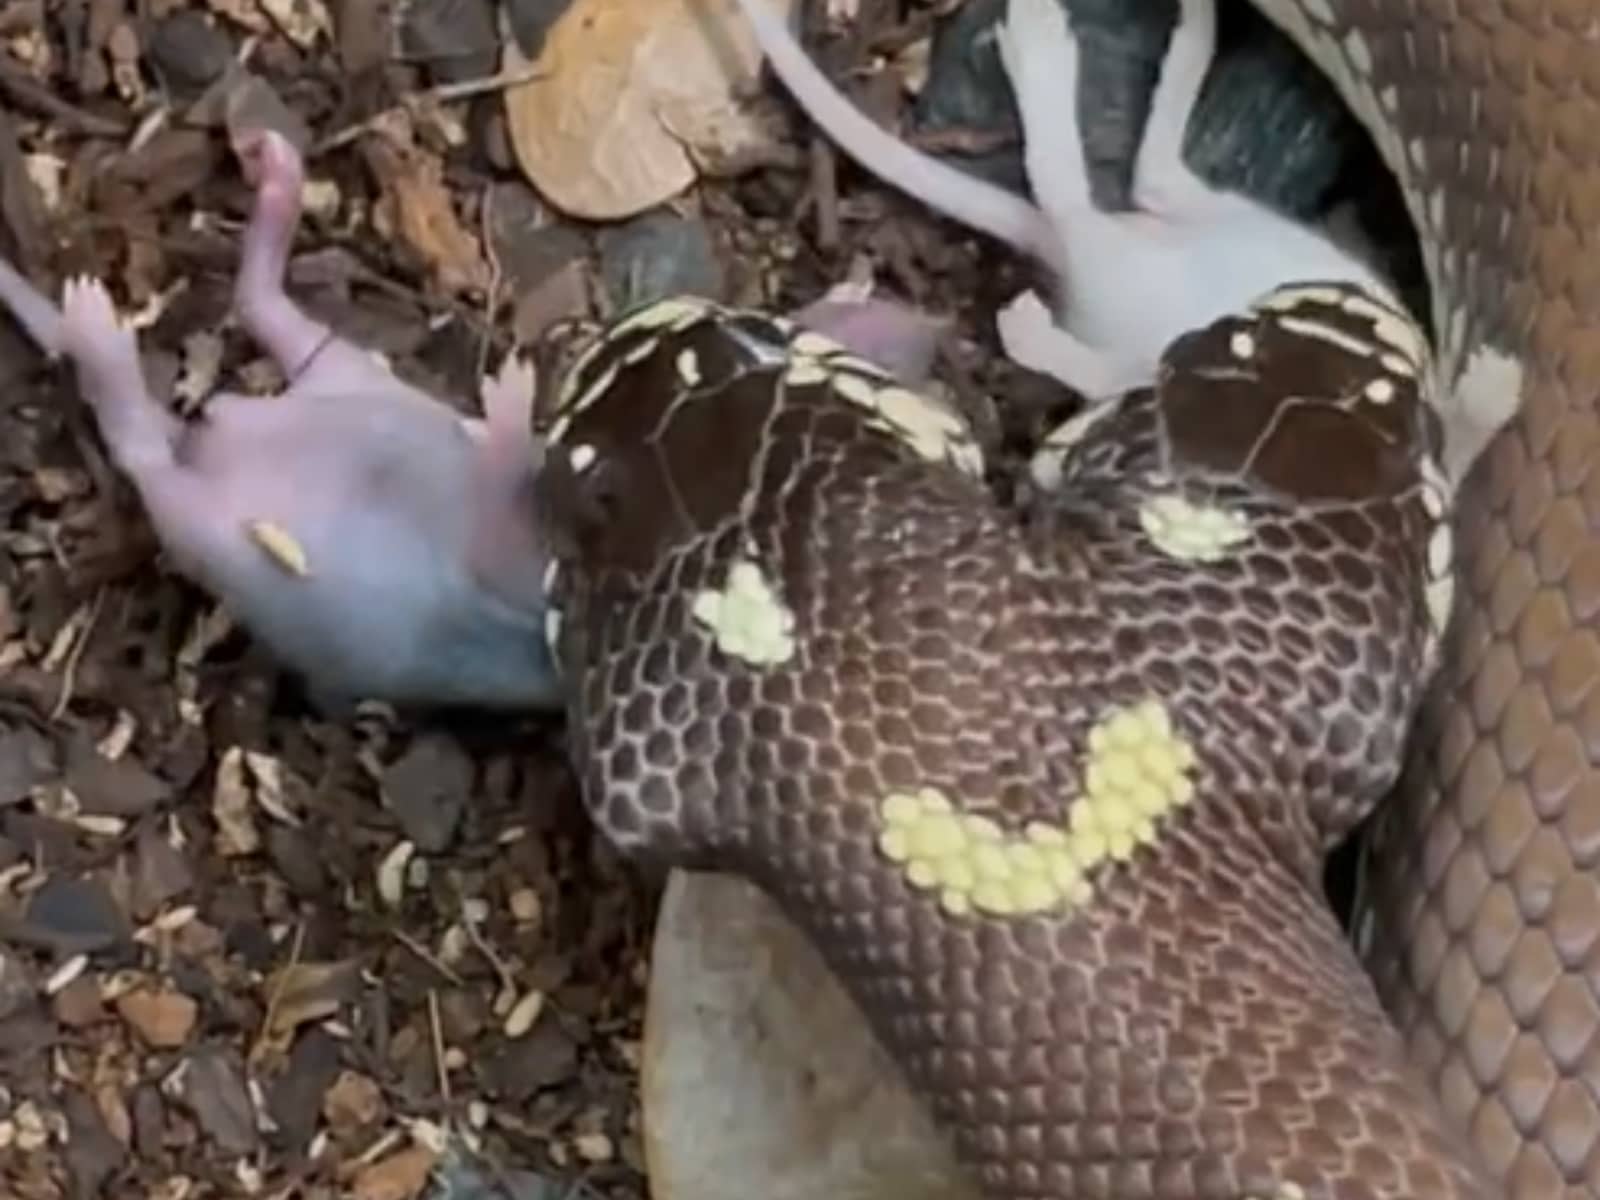 conjoined twins snake